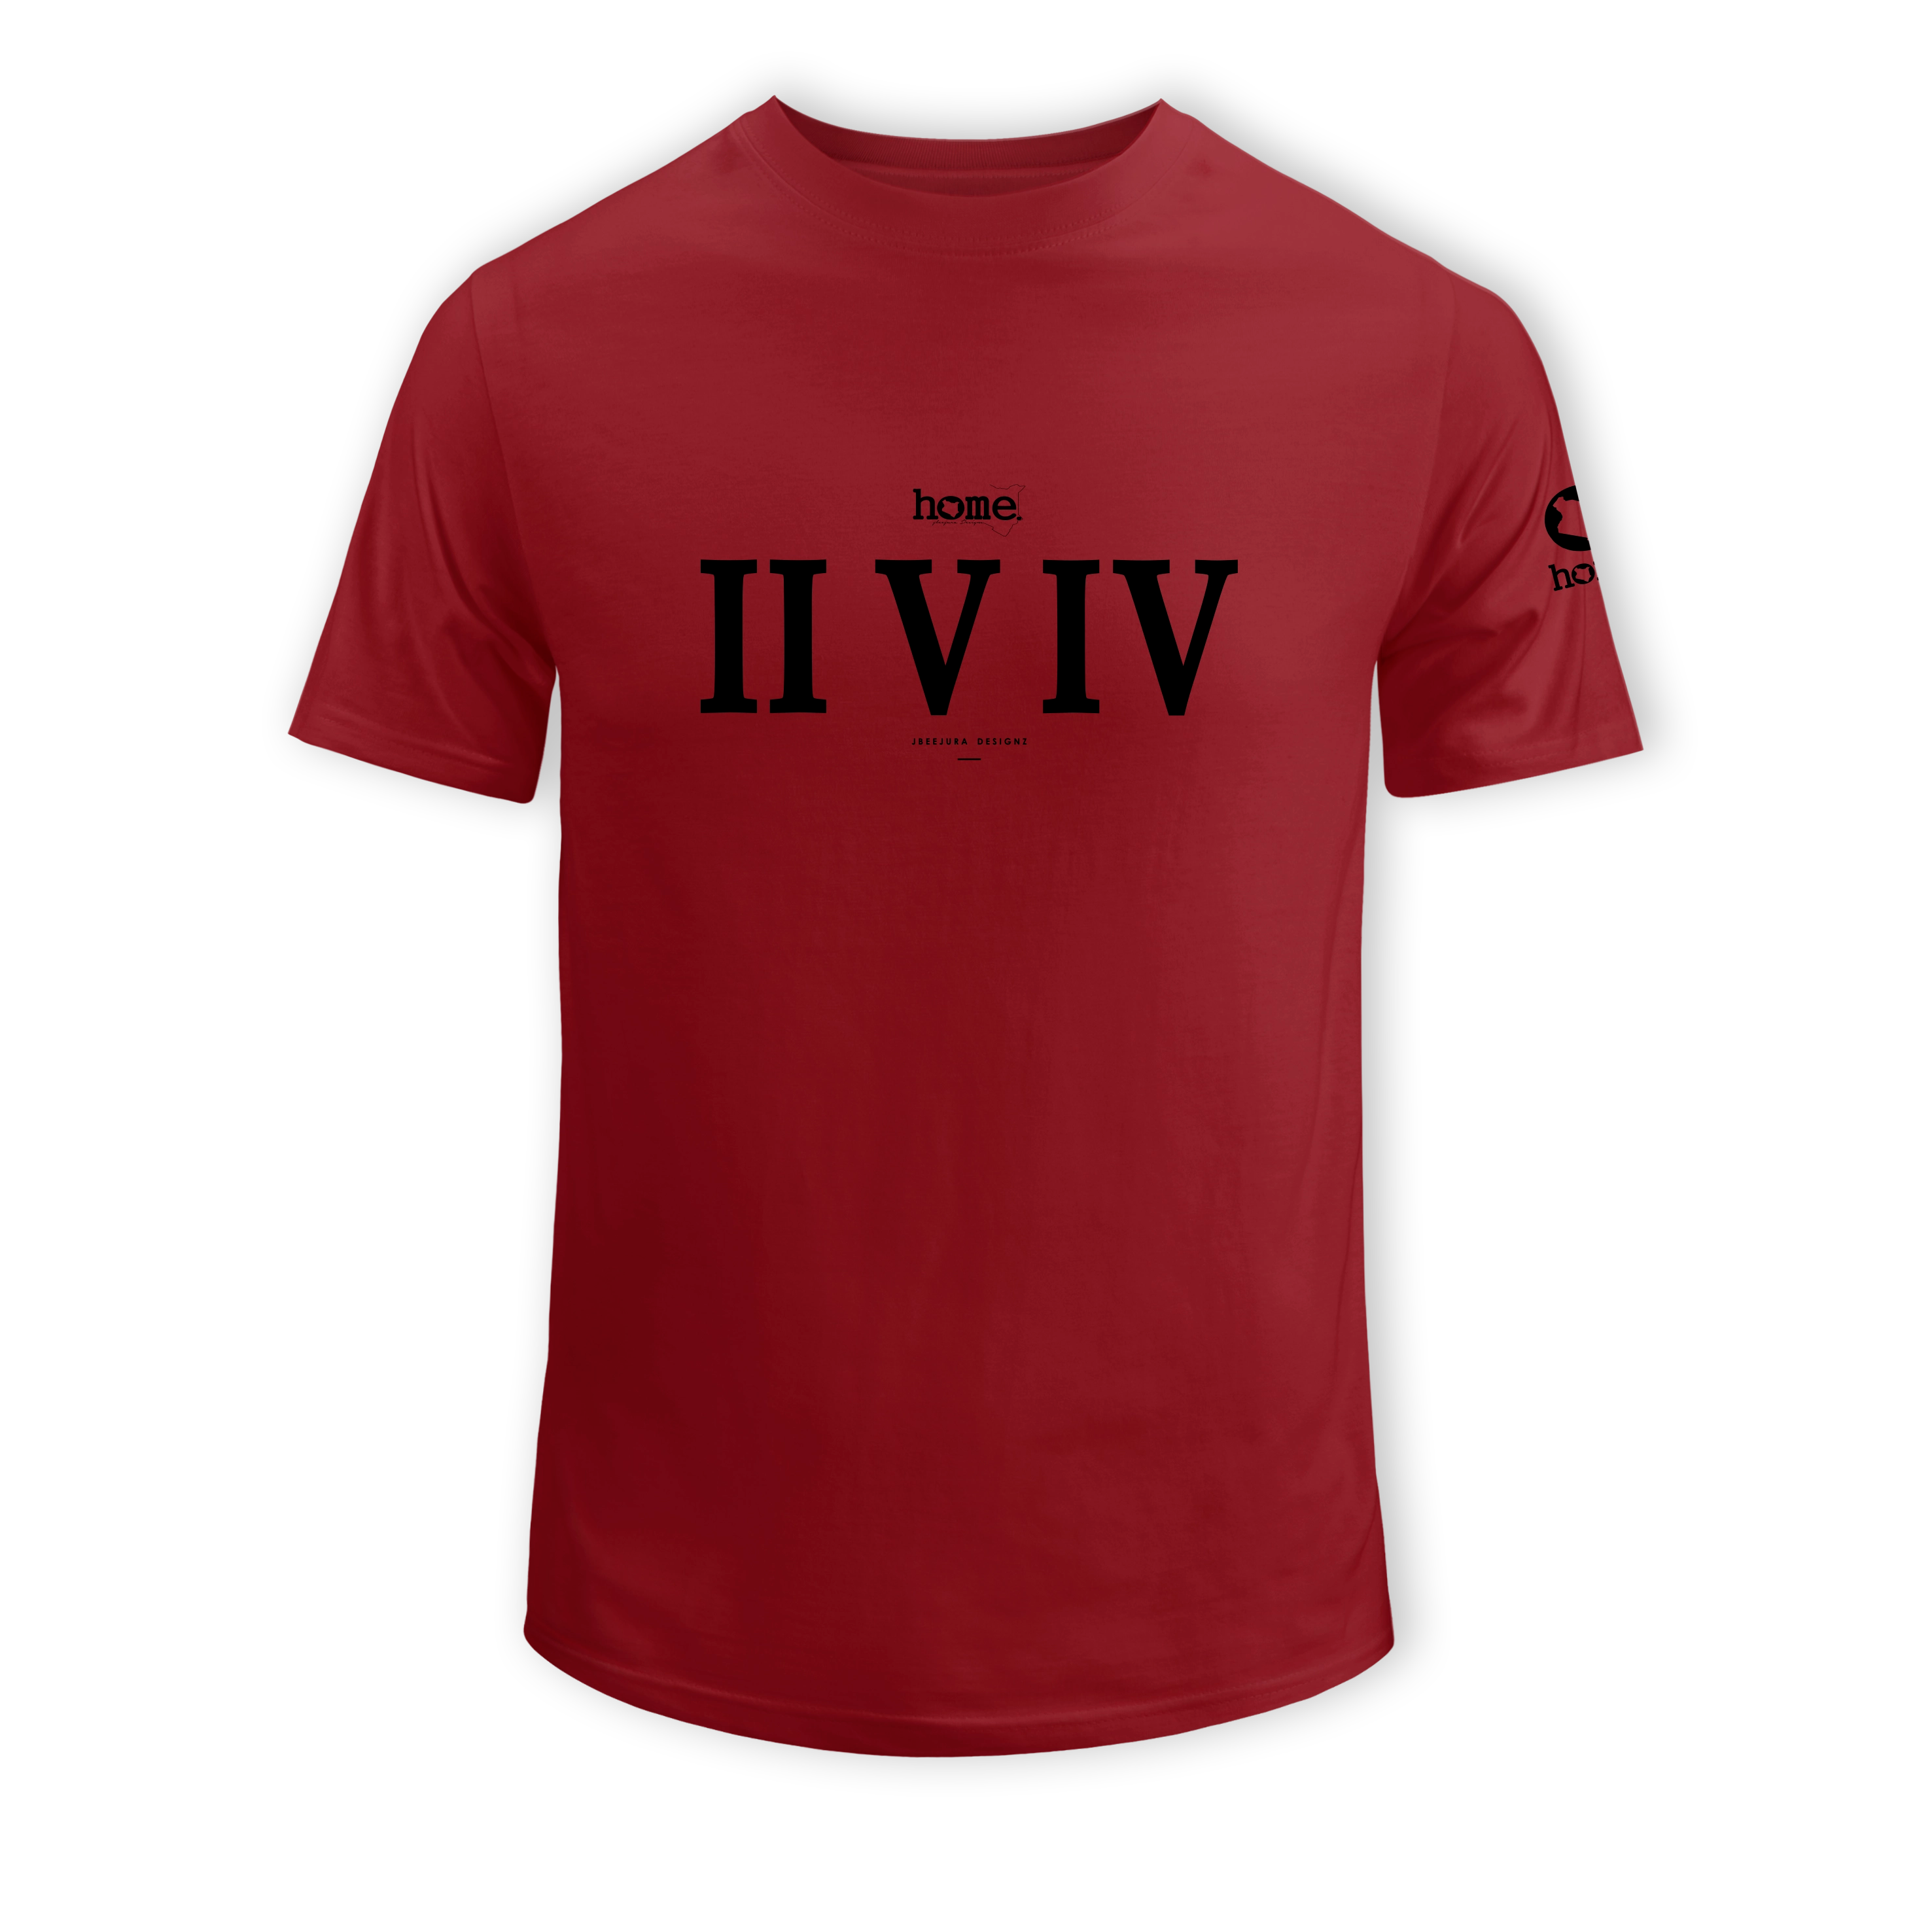 home_254 KIDS SHORT-SLEEVED MAROON RED T-SHIRT WITH A BLACK ROMAN NUMERALS PRINT – COTTON PLUS FABRIC